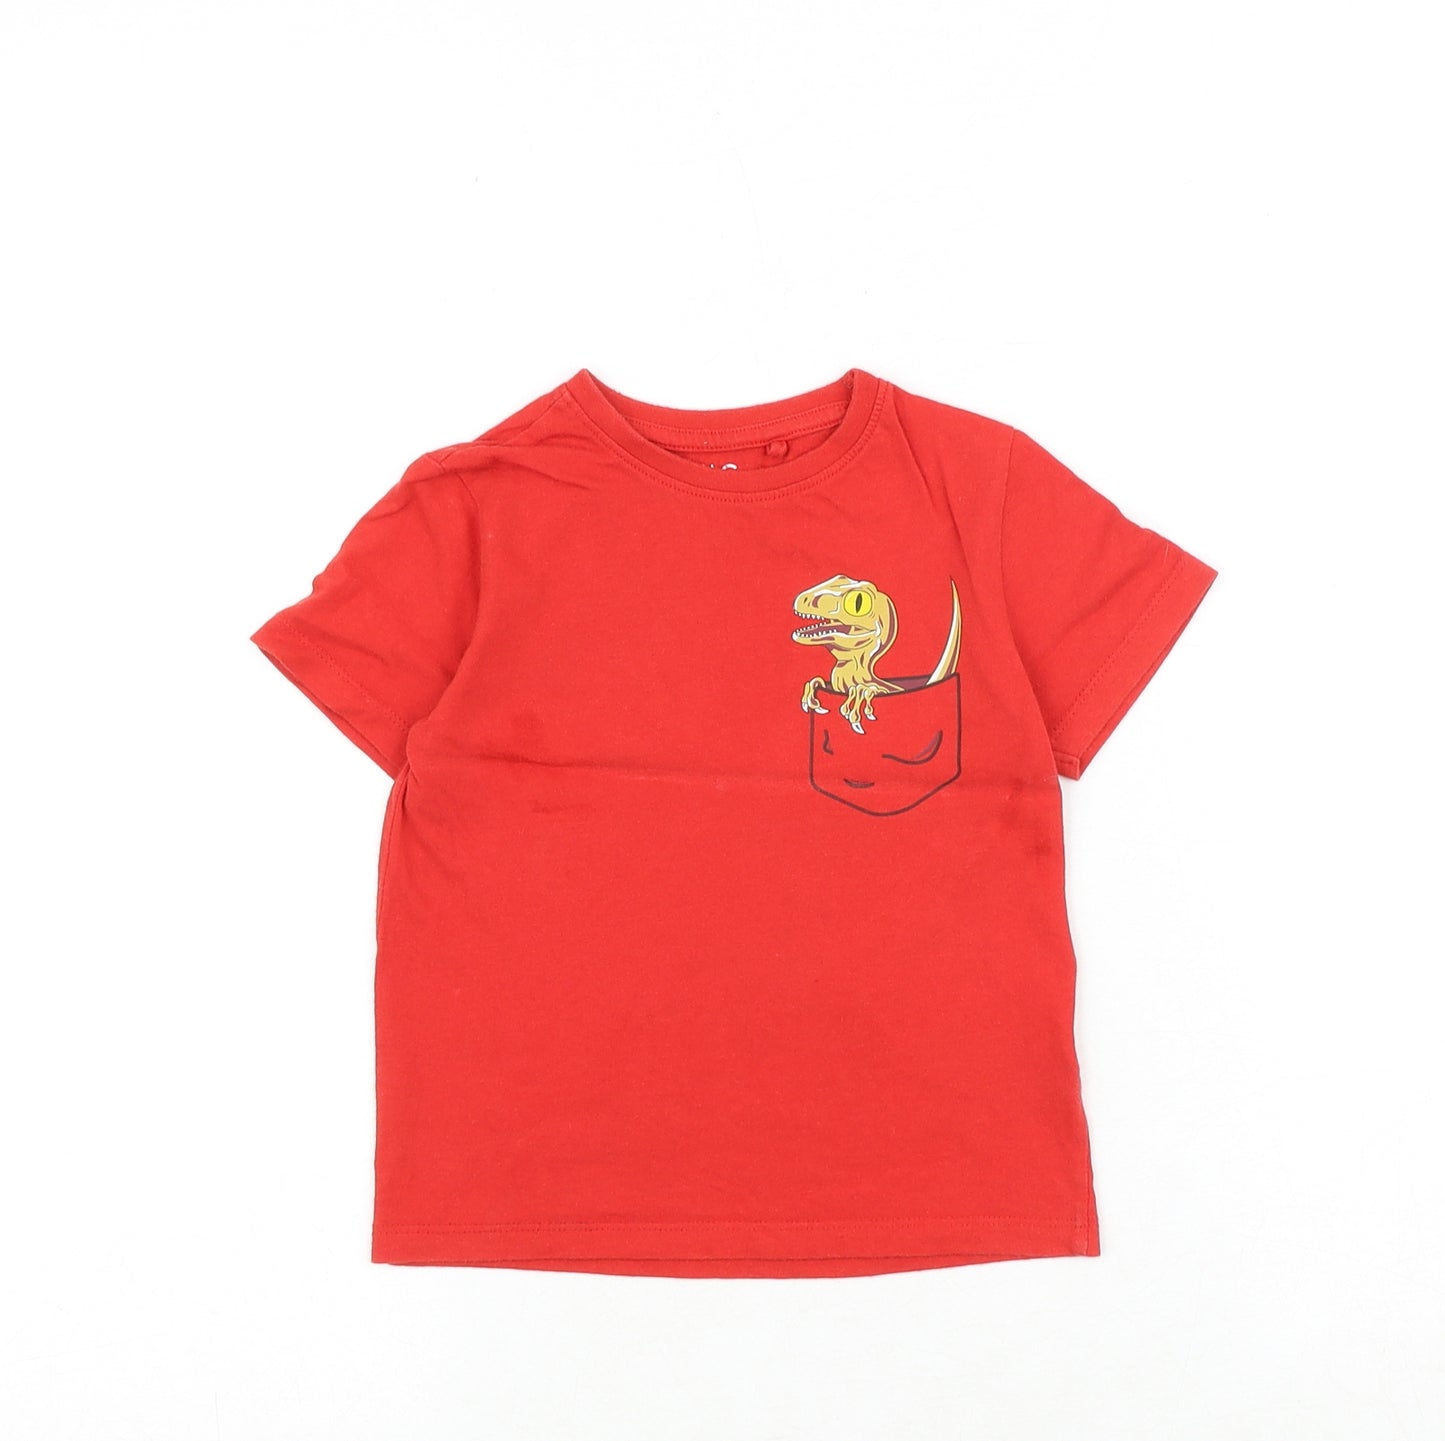 REDTAG Boys Red 100% Cotton Pullover T-Shirt Size 2-3 Years Round Neck Pullover - Dinosaur